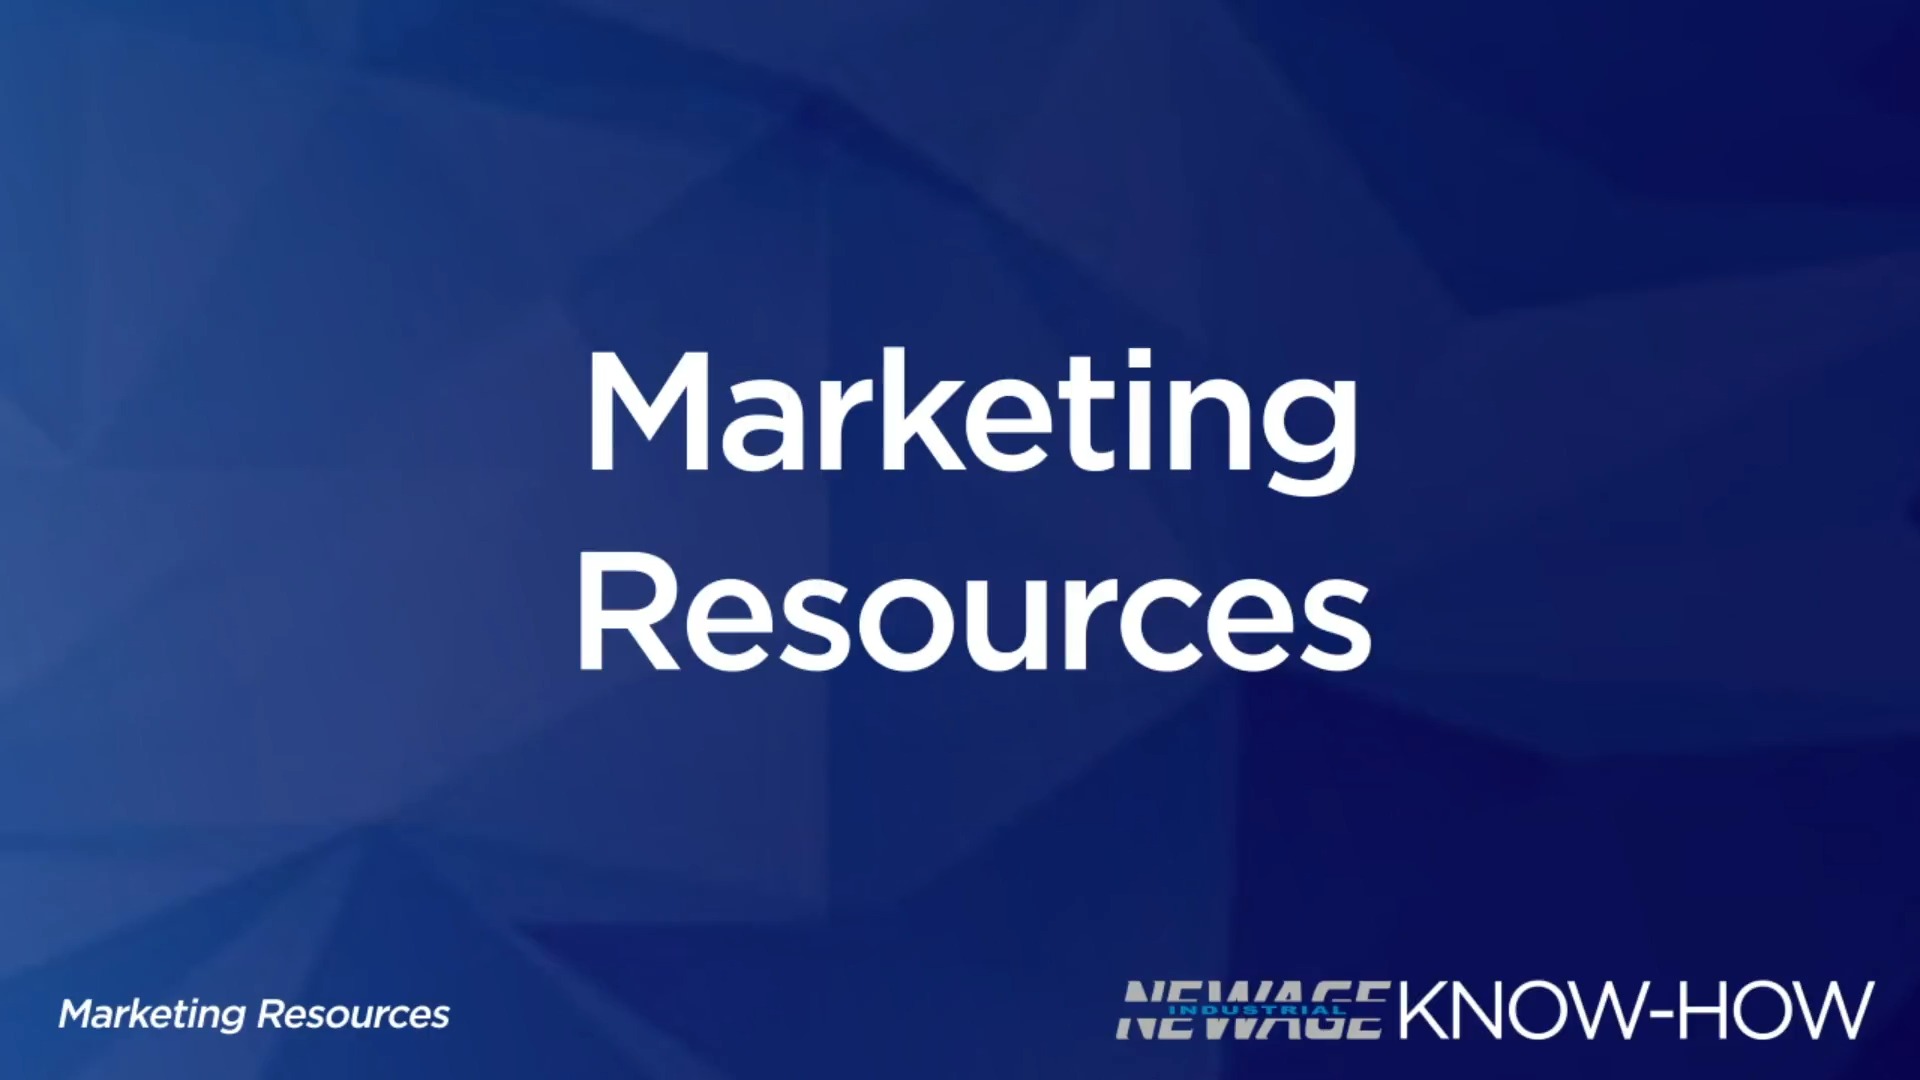 Know-How Video: Marketing Resources